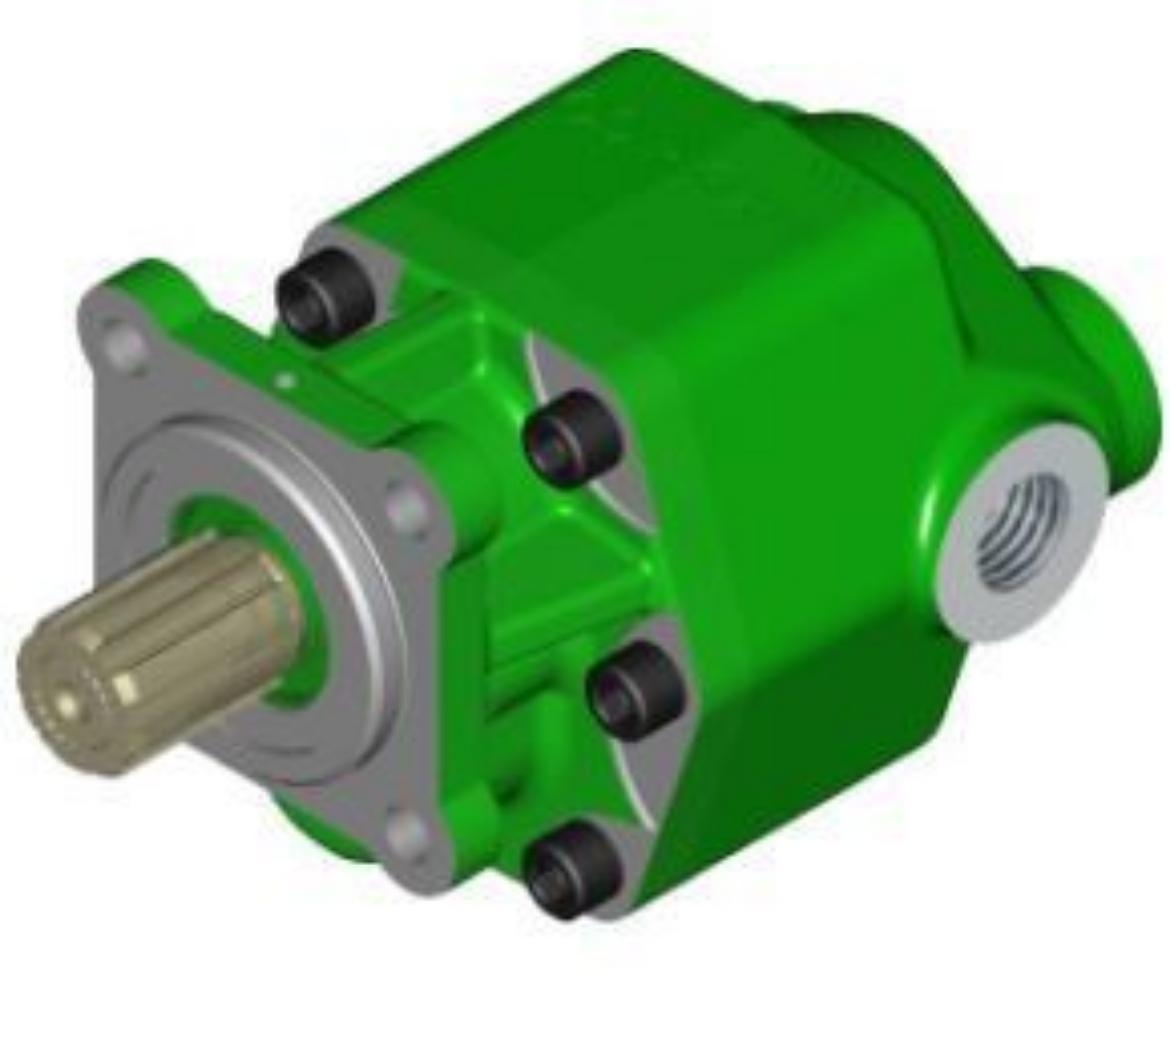 Picture of Hydreco Hydraulic Pump 90LPM Opposite direction to motor
250 Bar/3625psi Rated Pressure